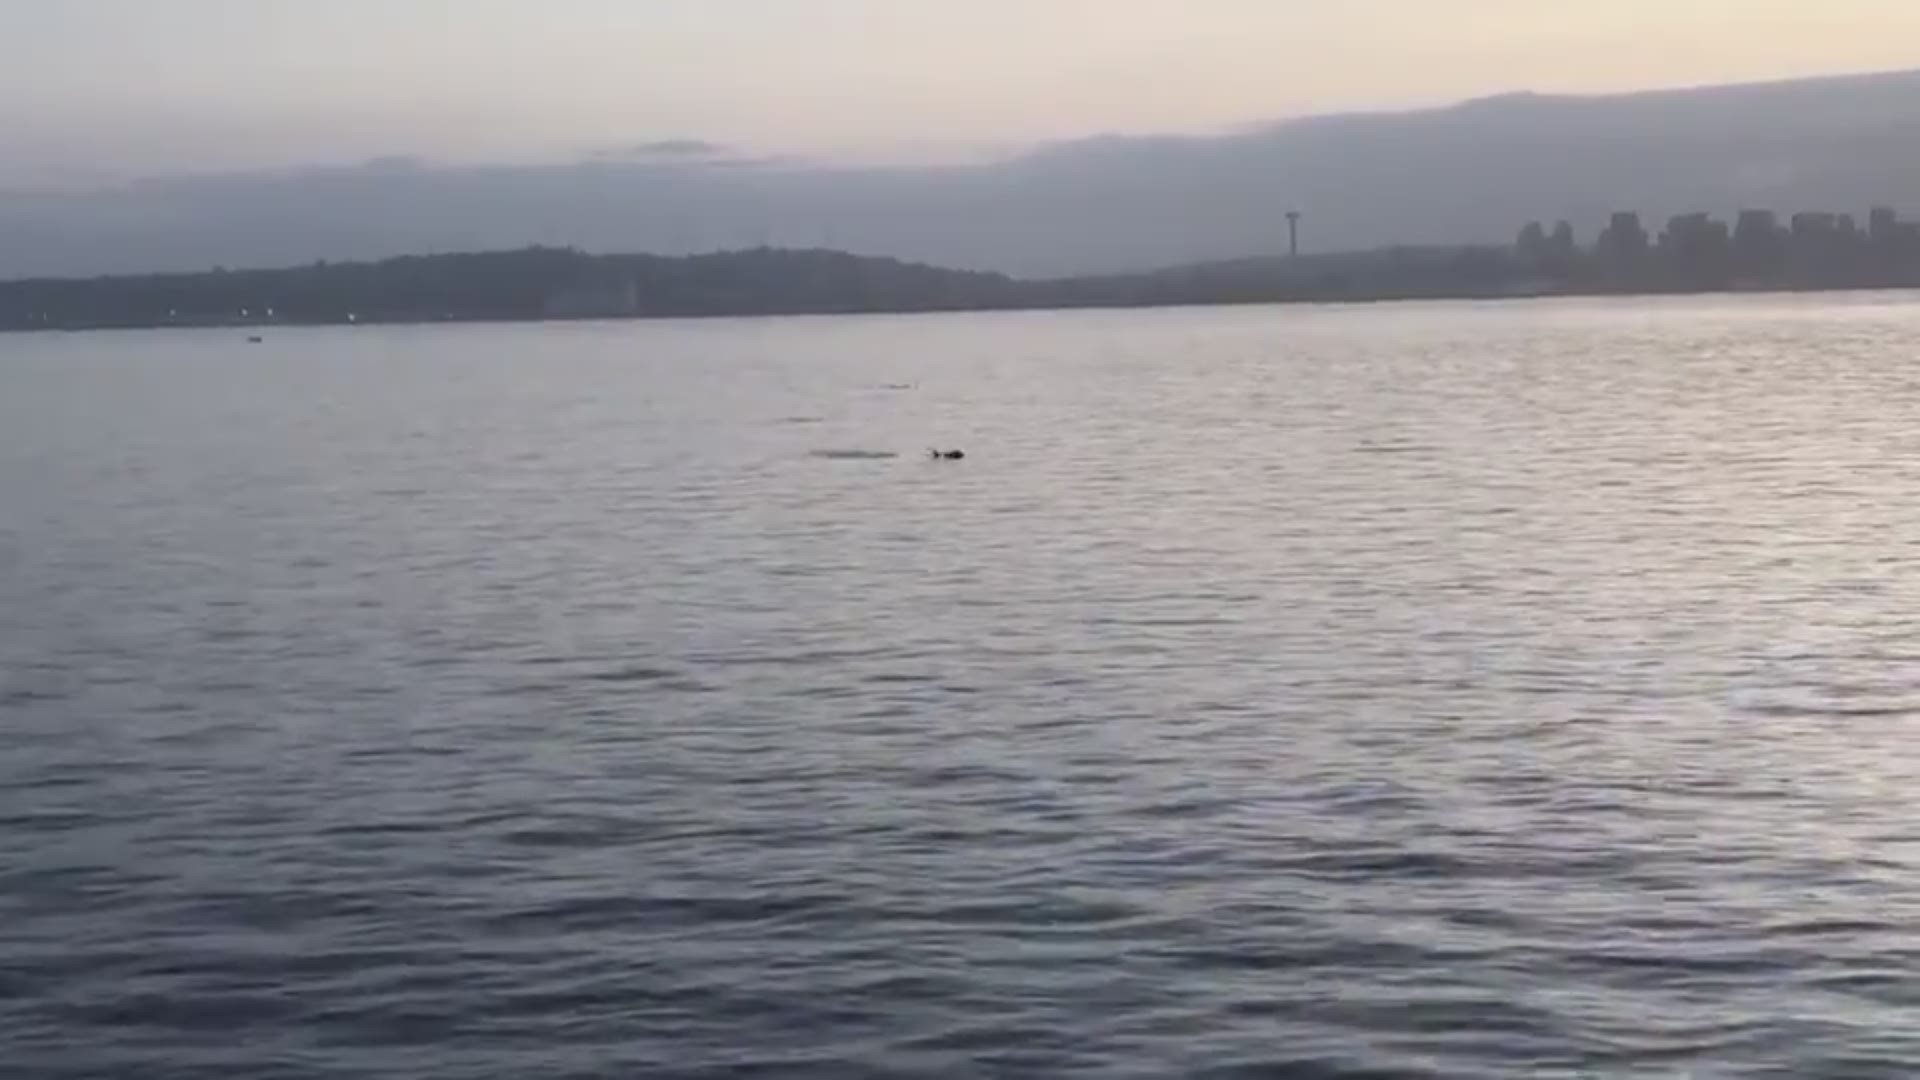 A pod of orcas were spotted in Puget Sound during a ferry trip from Bremerton to Seattle. Video courtesy of Washington State Ferries employee Pamela VanOverbeke.